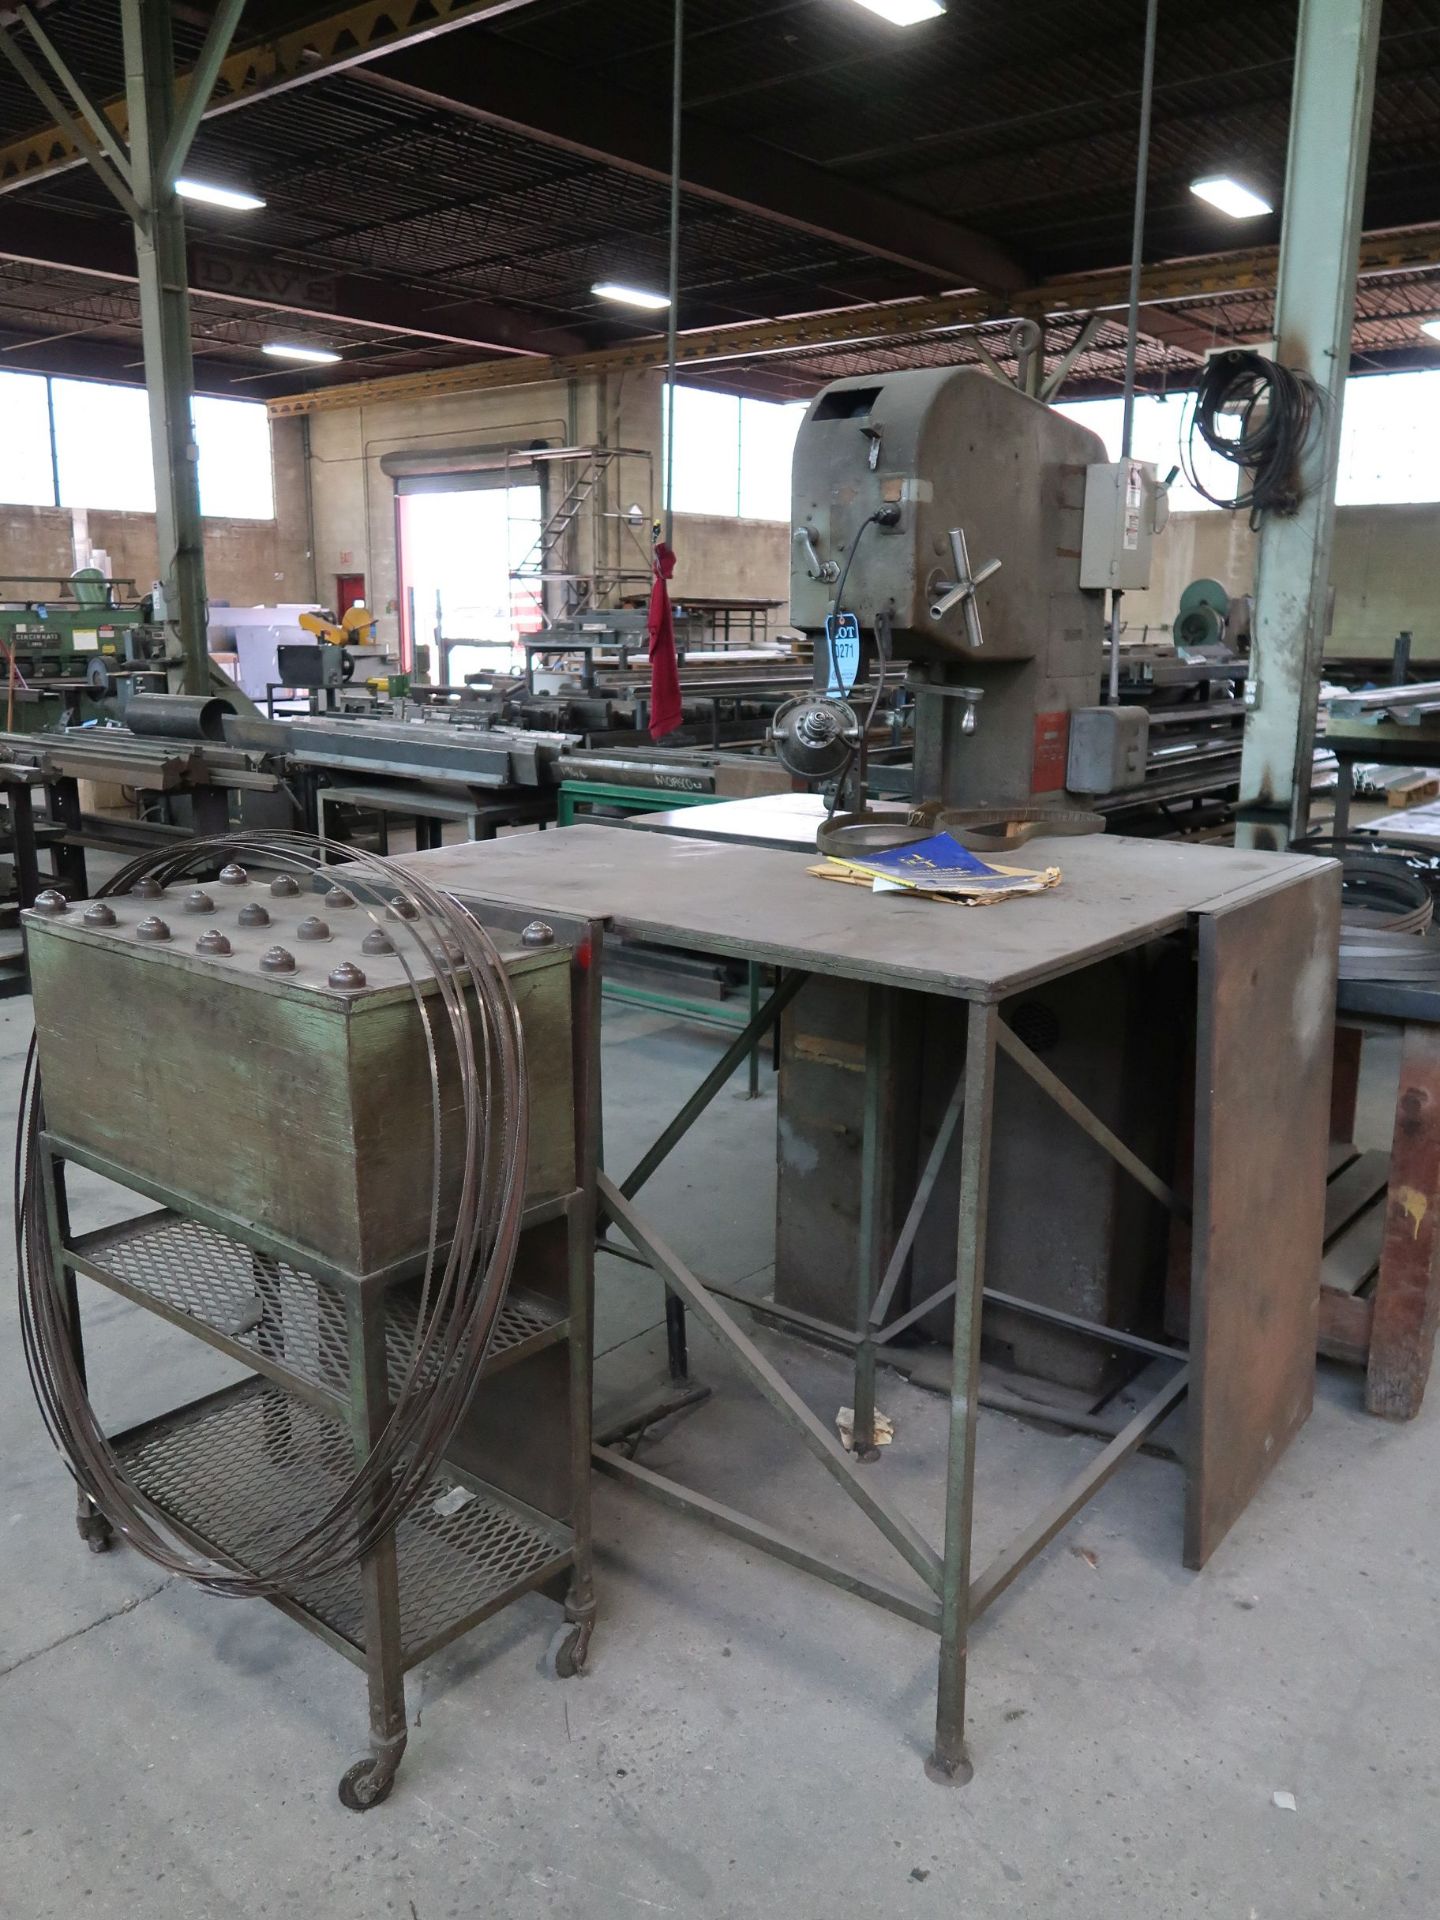 16" DOALL MODEL 1612-1 VERTICAL BAND SAW; S/N 148-60258 - Image 2 of 6